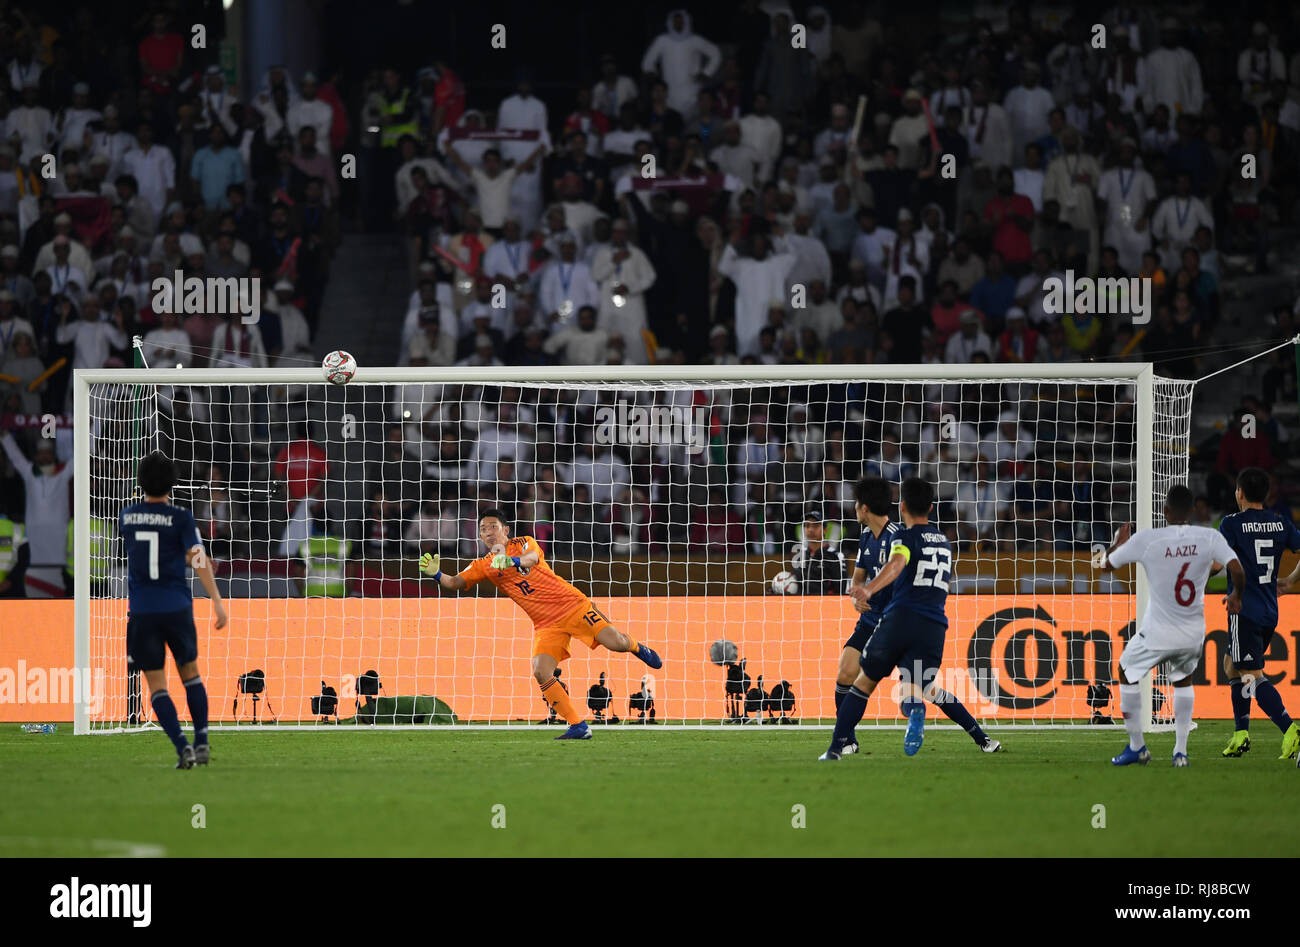 Gonda Shuichi seen in action during the final Asian cup 2019 match between Qatar and Japan at the Zayed sport city stadium. Qatar beat Japan, 3:1 Stock Photo